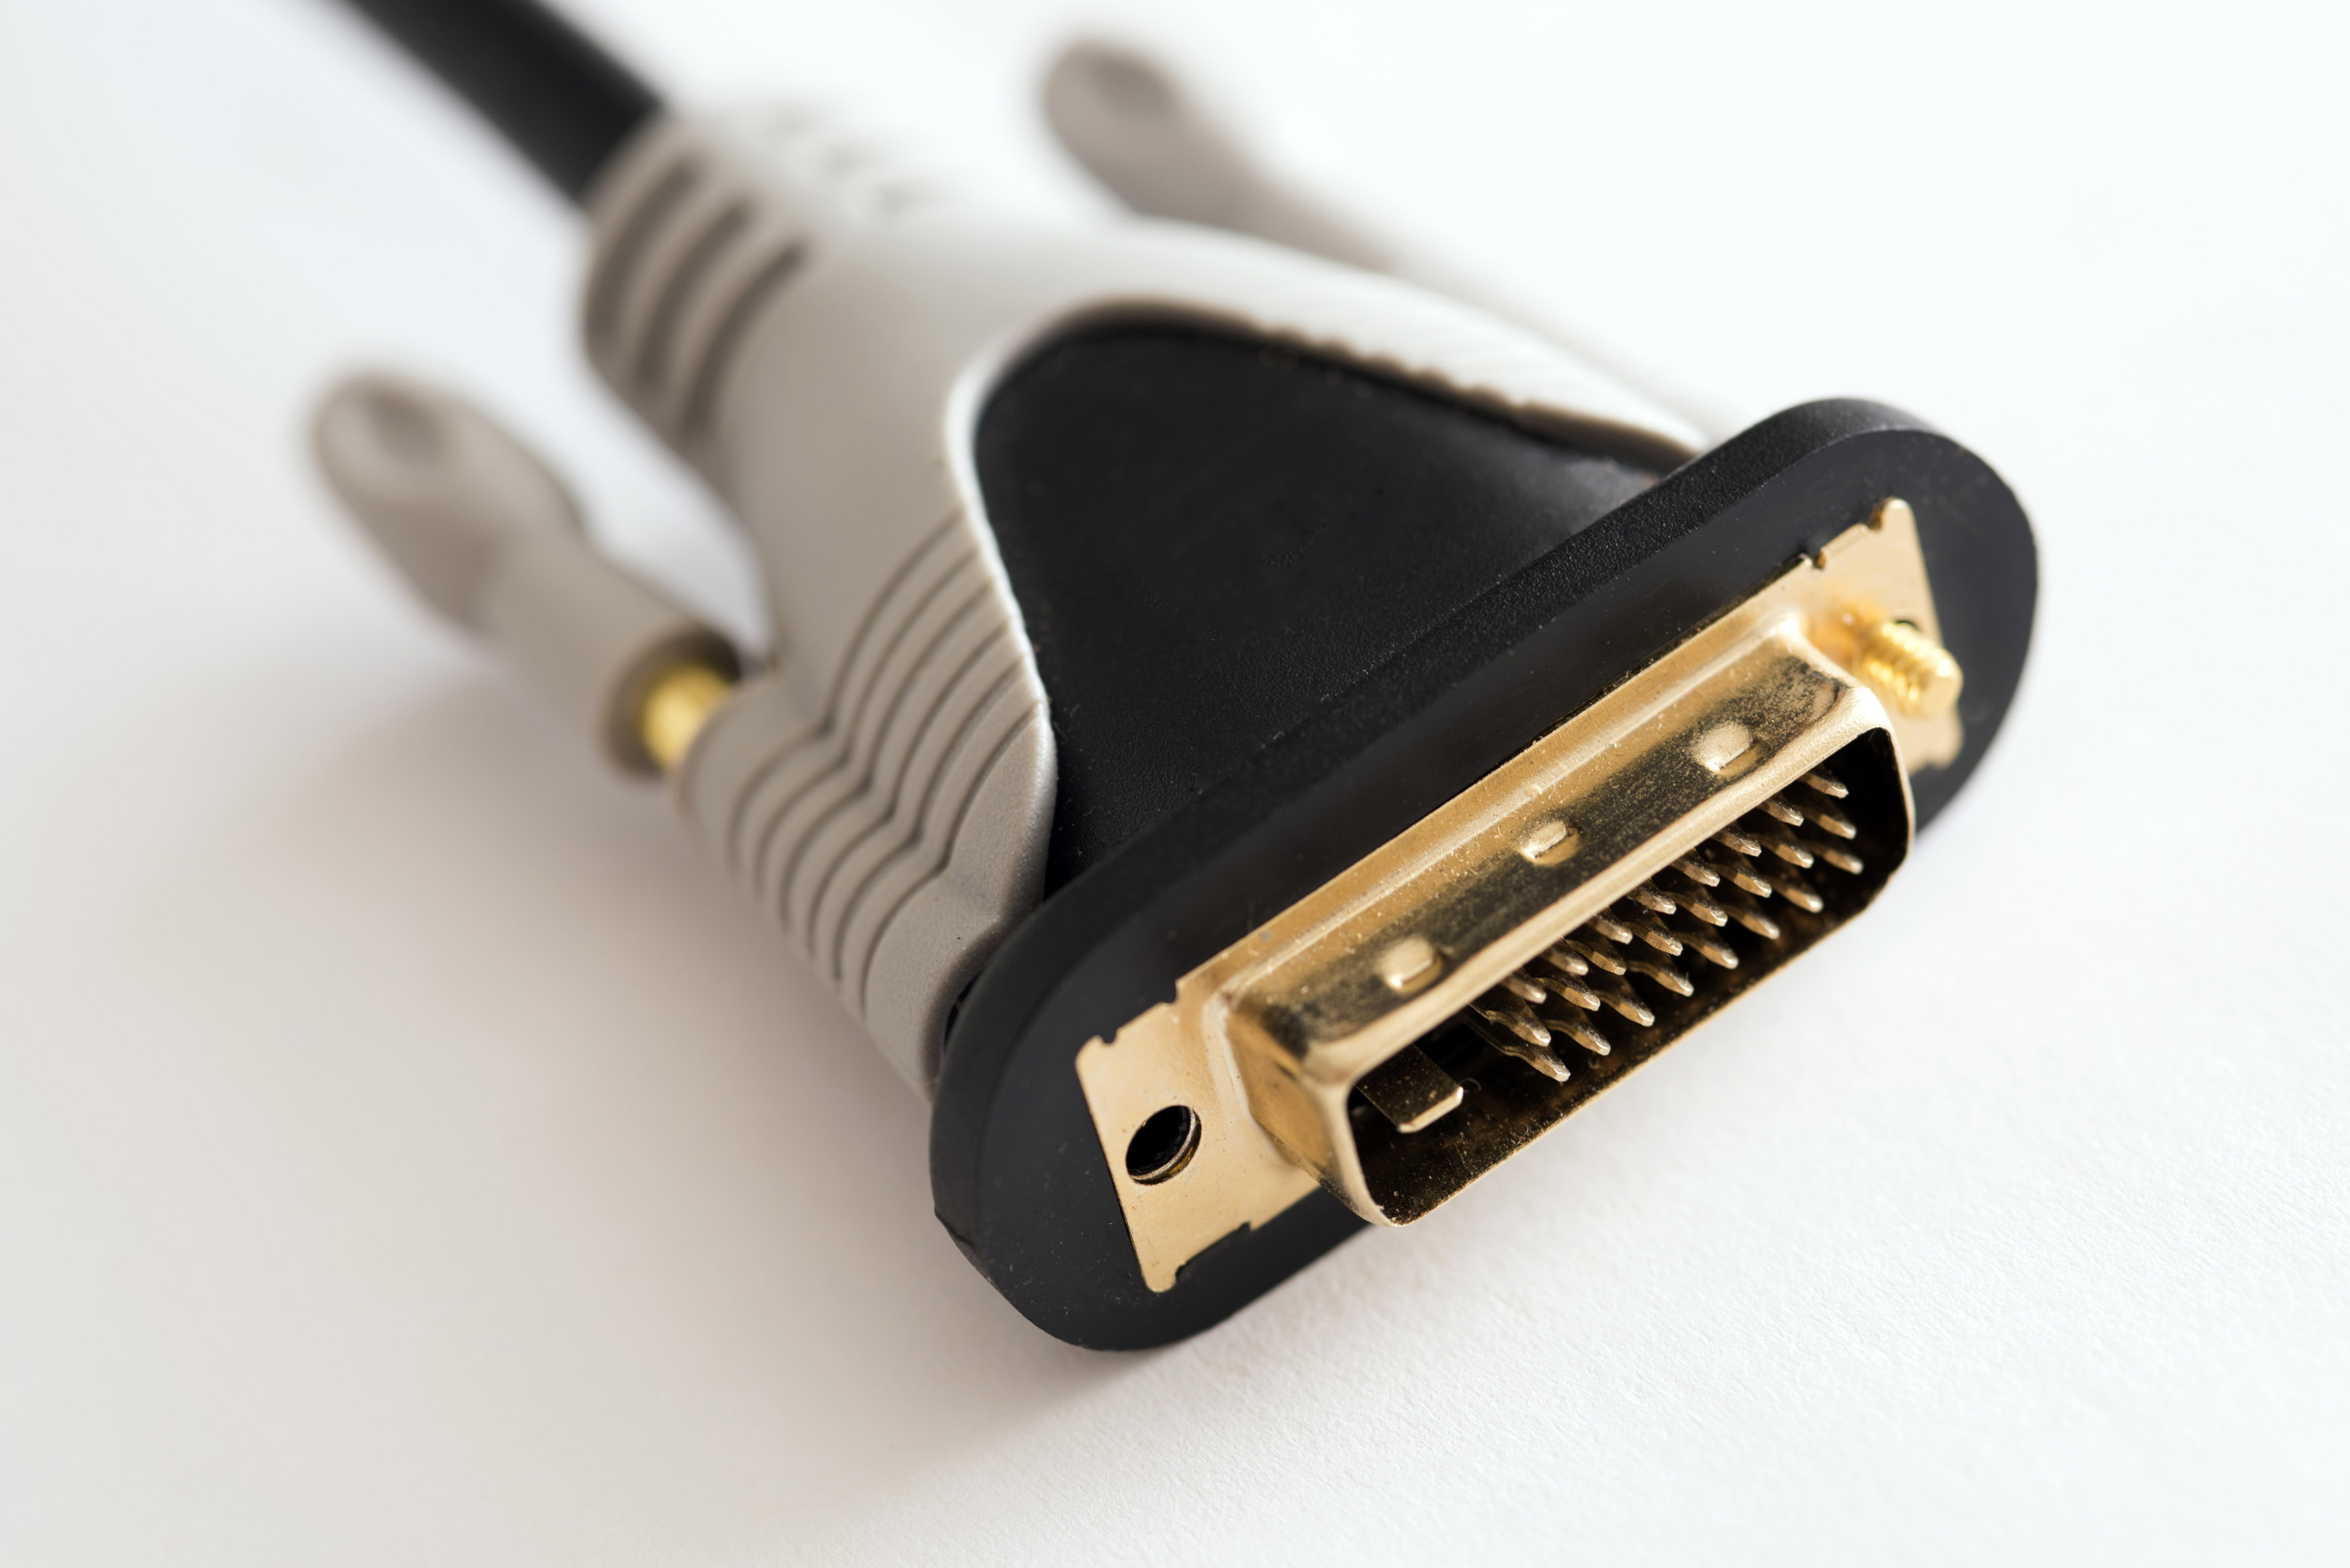 Image Of Dvi Connector Close Up Over White Background